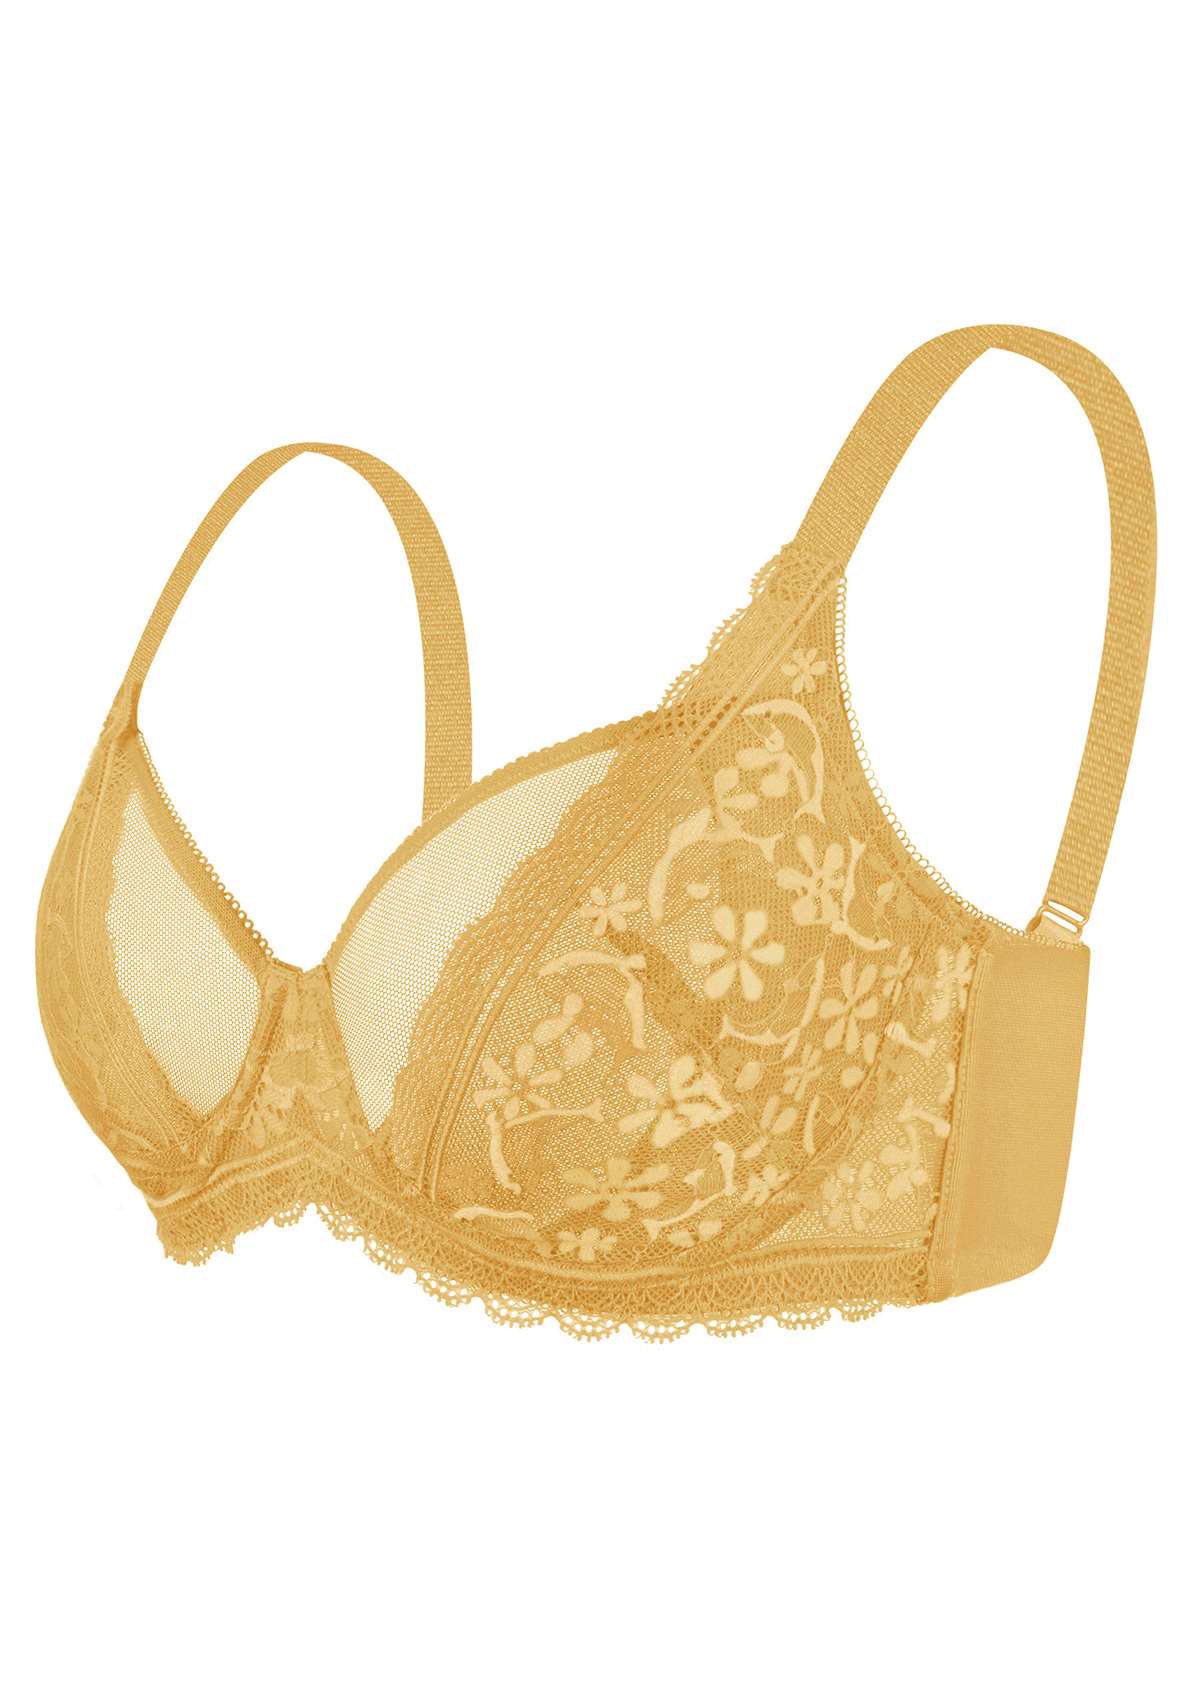 HSIA Anemone Lace Unlined Bra: Supportive, Lightweight Bra - Ginger / 34 / DDD/F